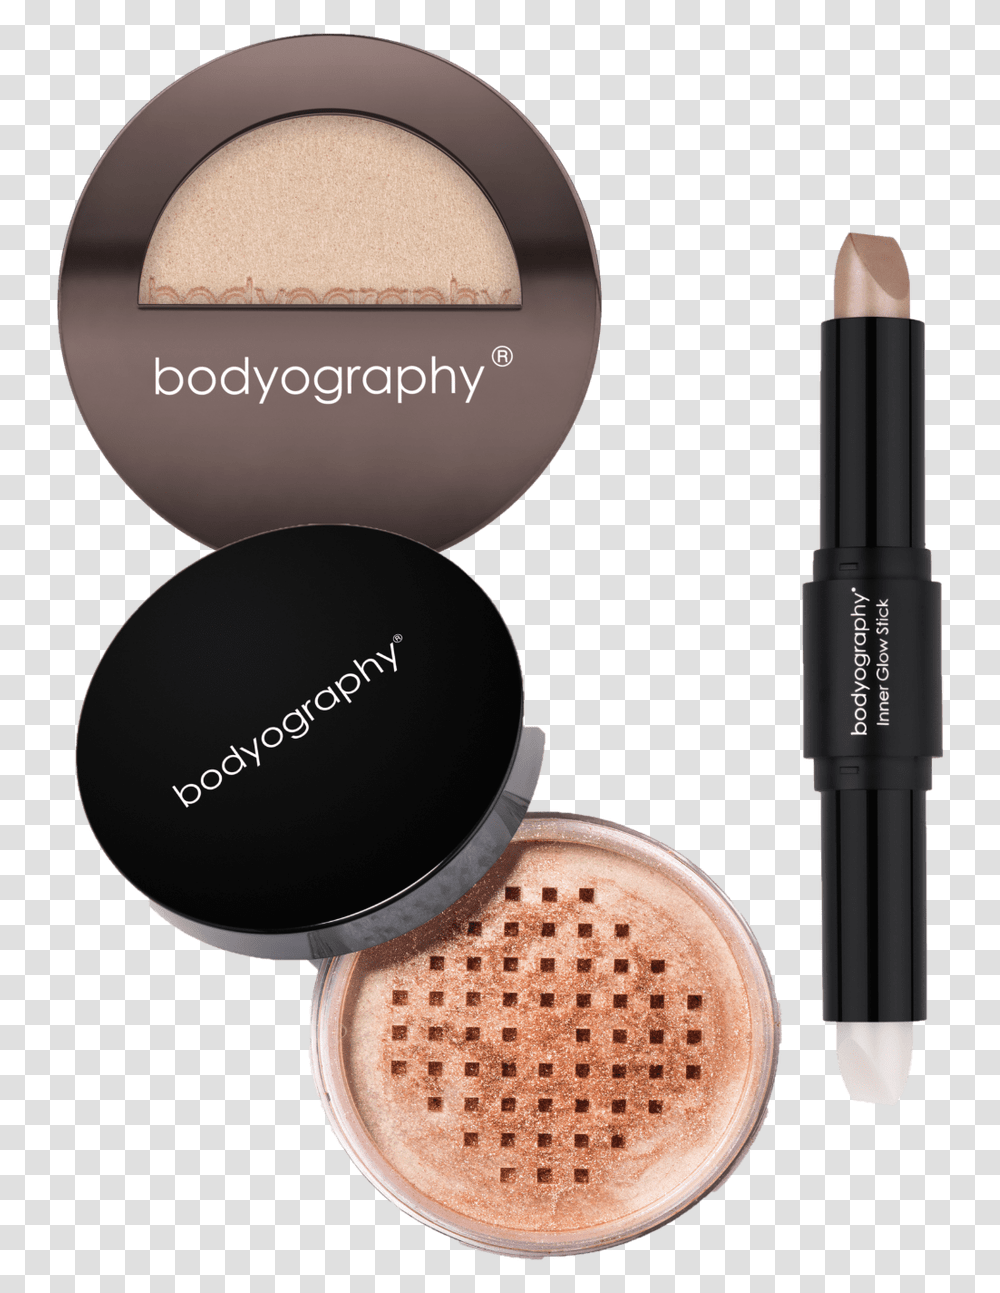 Inner Glow Pack Bodyography Loose Shimmer Powder, Cosmetics, Lamp, Lipstick, Face Makeup Transparent Png